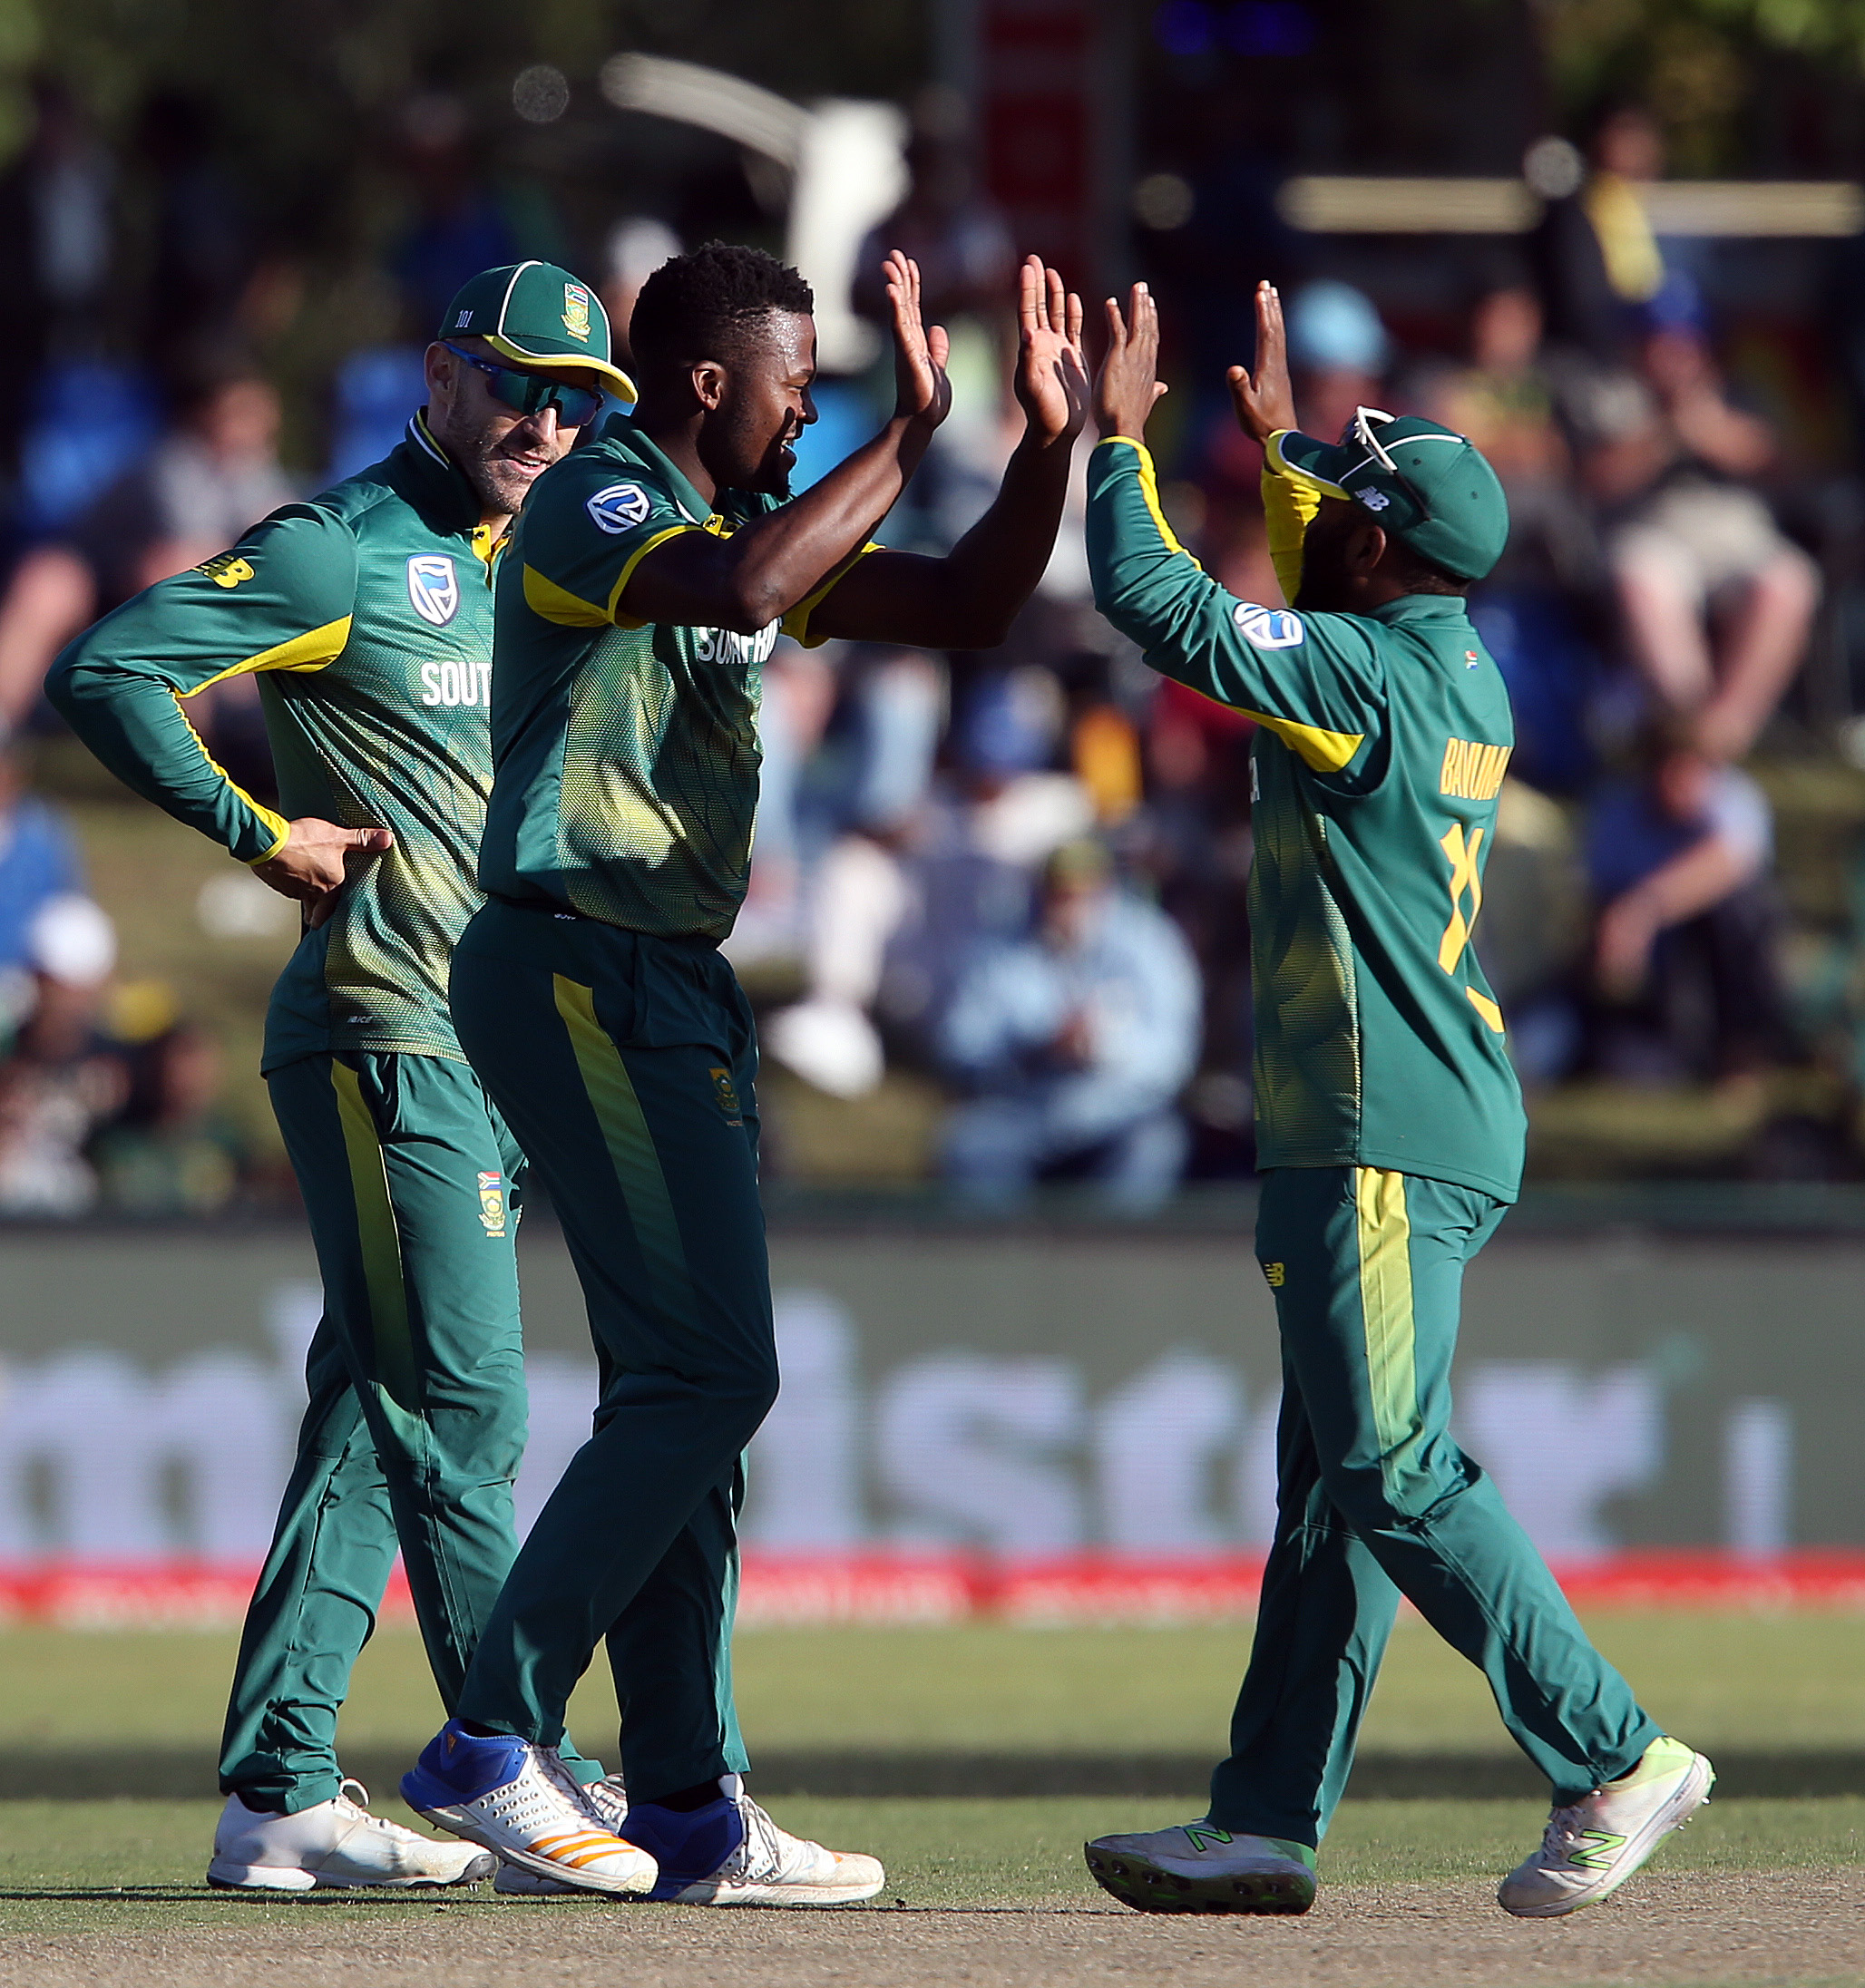 WATCH | South Africa's lack of sportsmanship leaves Bangladesh fuming